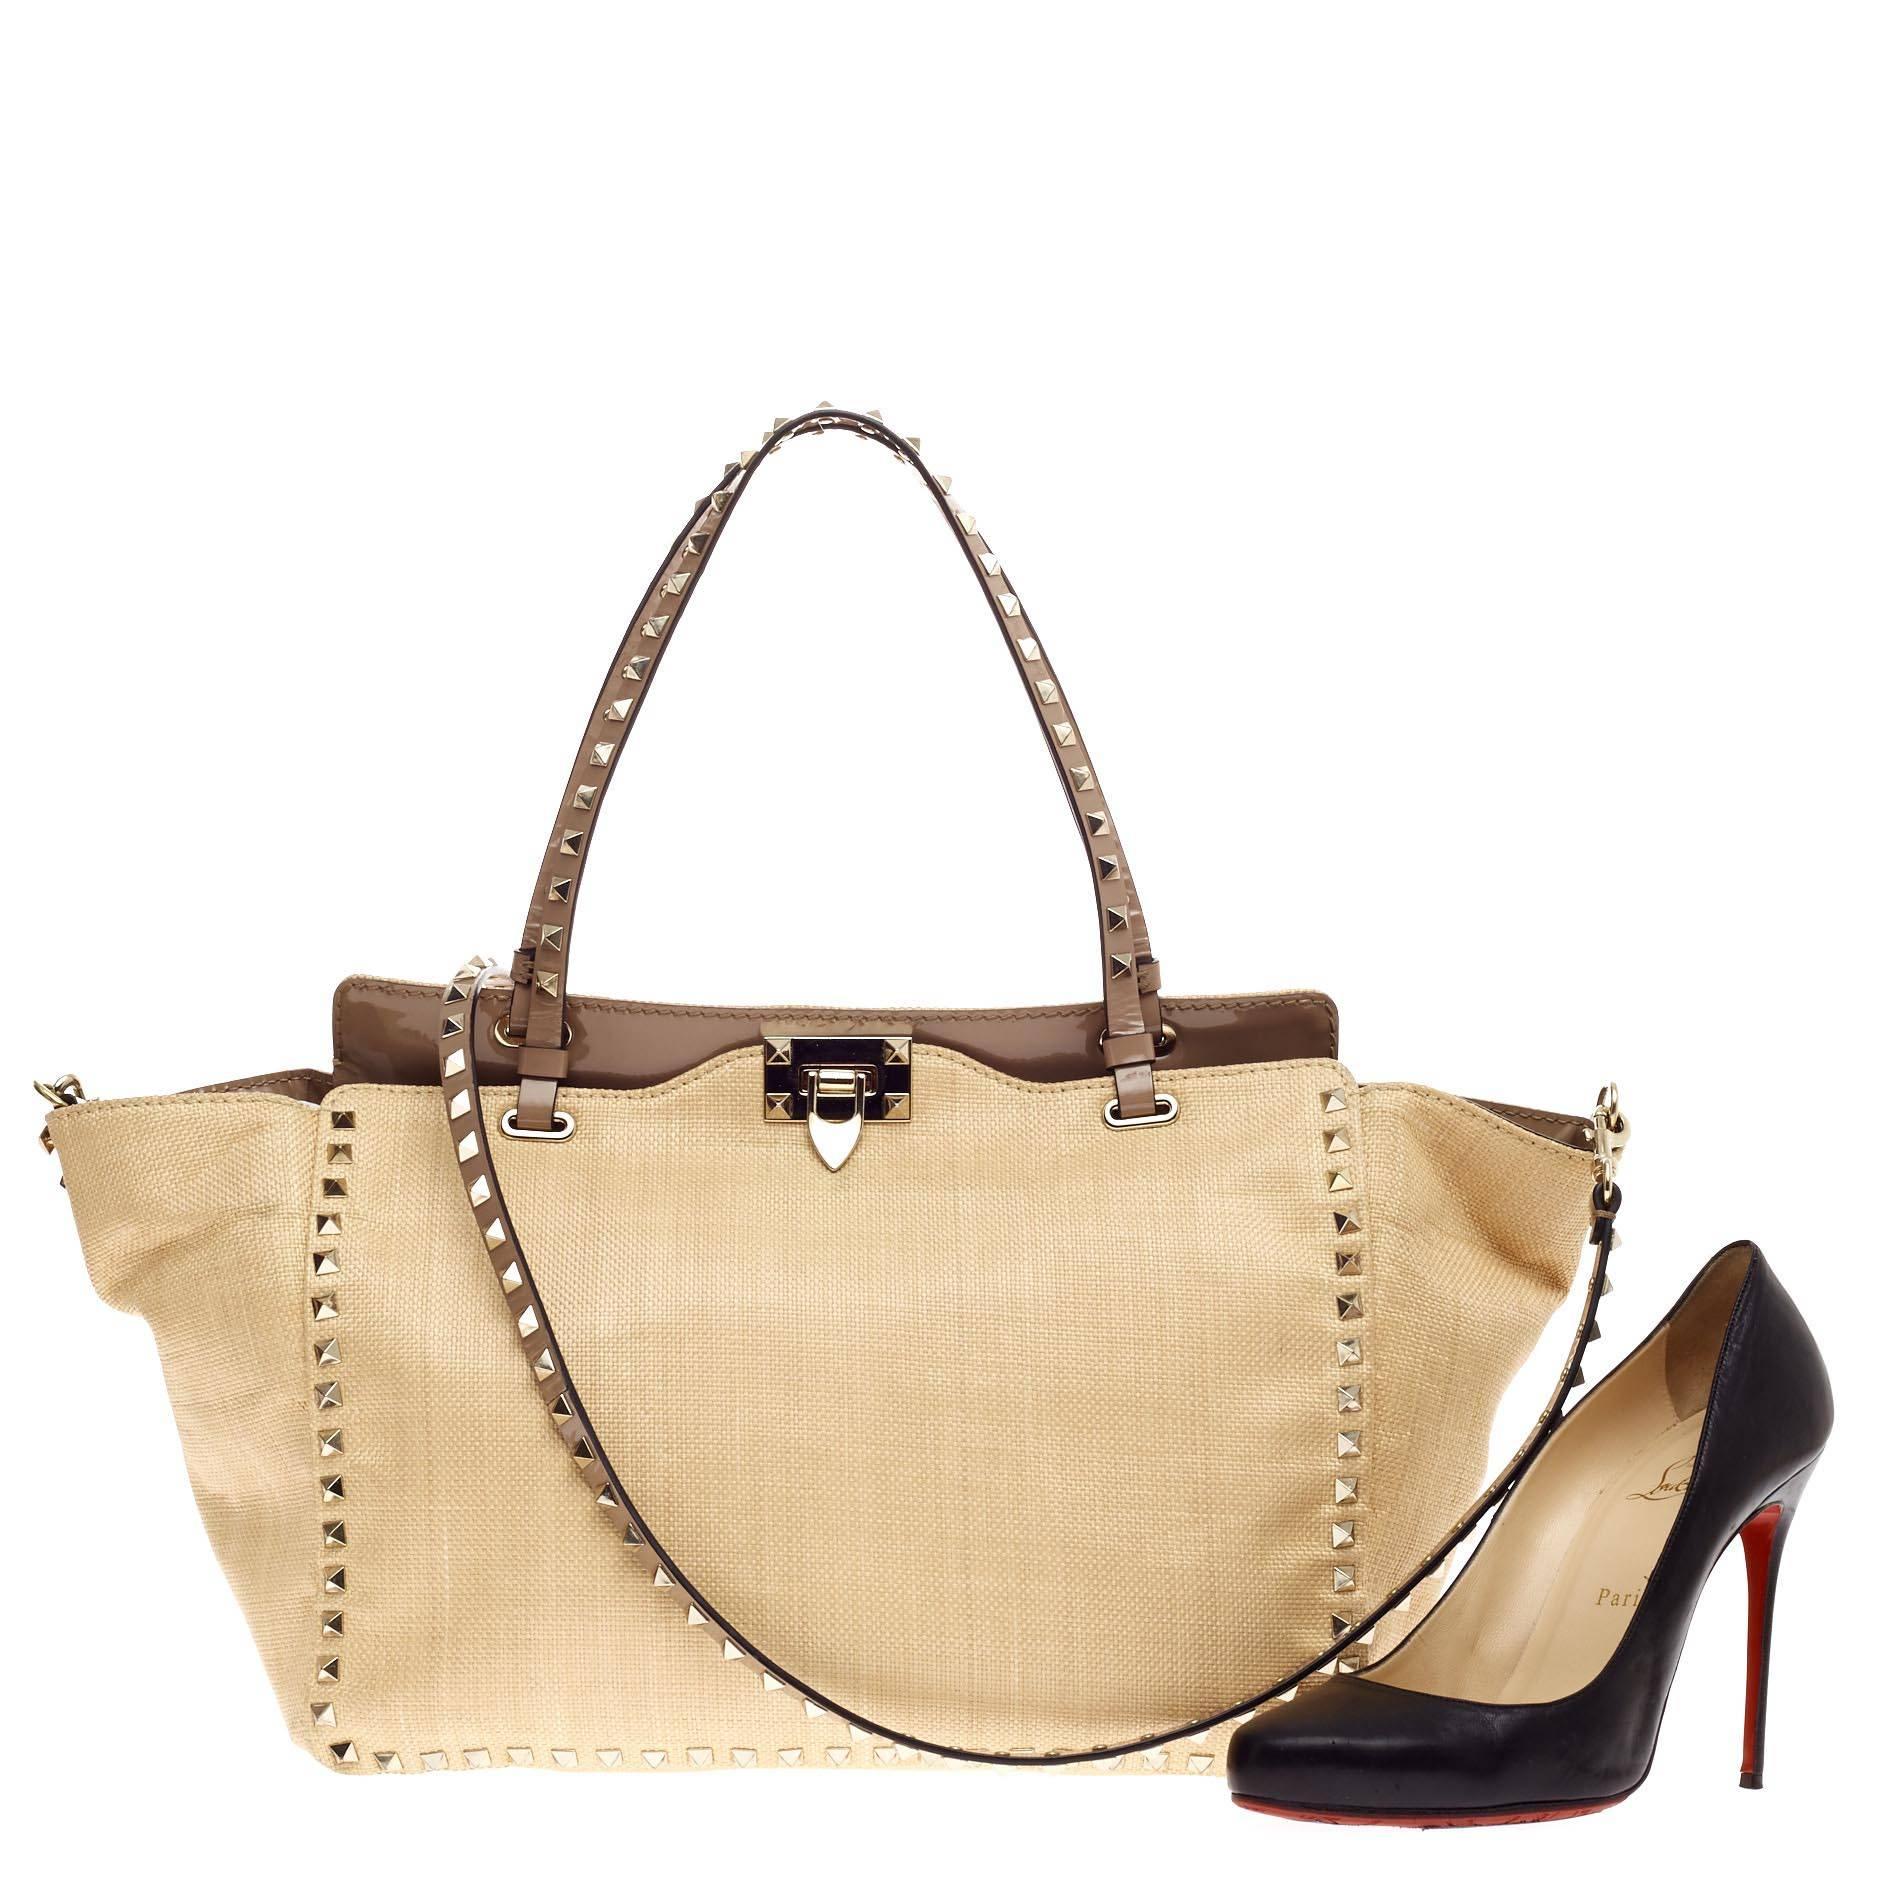 This authentic Valentino Rockstud Tote Raffia Medium is the perfect daily bag for the on-the-go fashionista. Crafted from beautiful, durable raffia with patent leather trims, this tote features dual flat studded patent leather handles, gold-tone